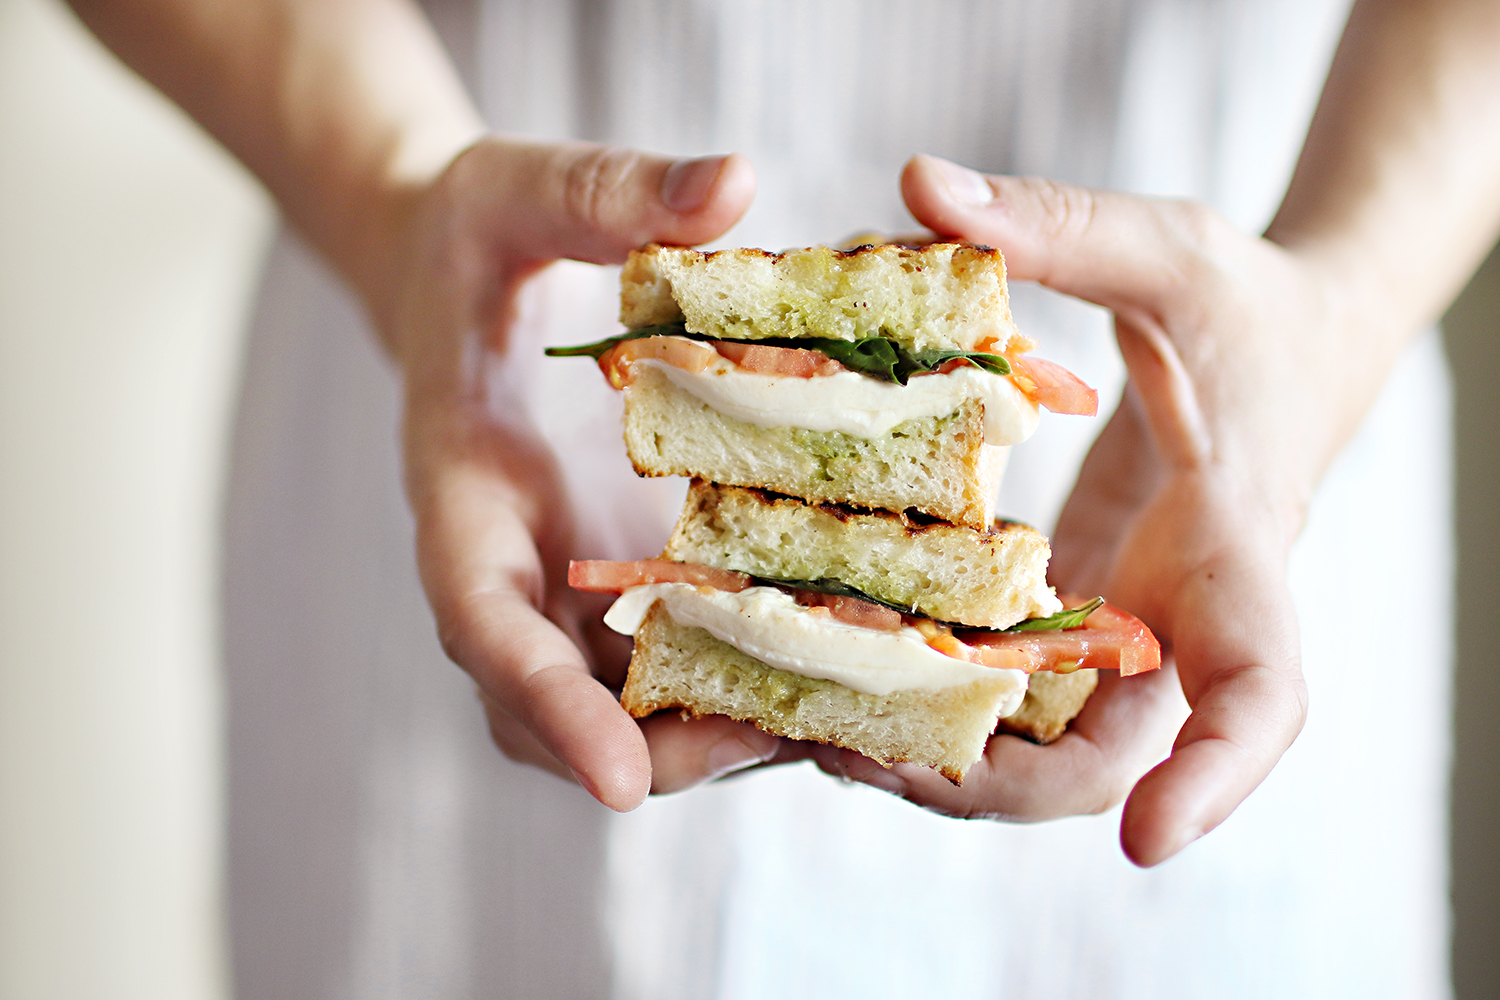 A fresh and easy recipe for a delicious basil, tomato and mozzarella sandwich. The perfect option for a light summer meal! Get the recipe now on Haus of Layne! #EasyMealIdeas #SandwichIdeas #SummerRecipeIdeas #Basil #Mozzarella #Tomato #Pesto #Sandwich